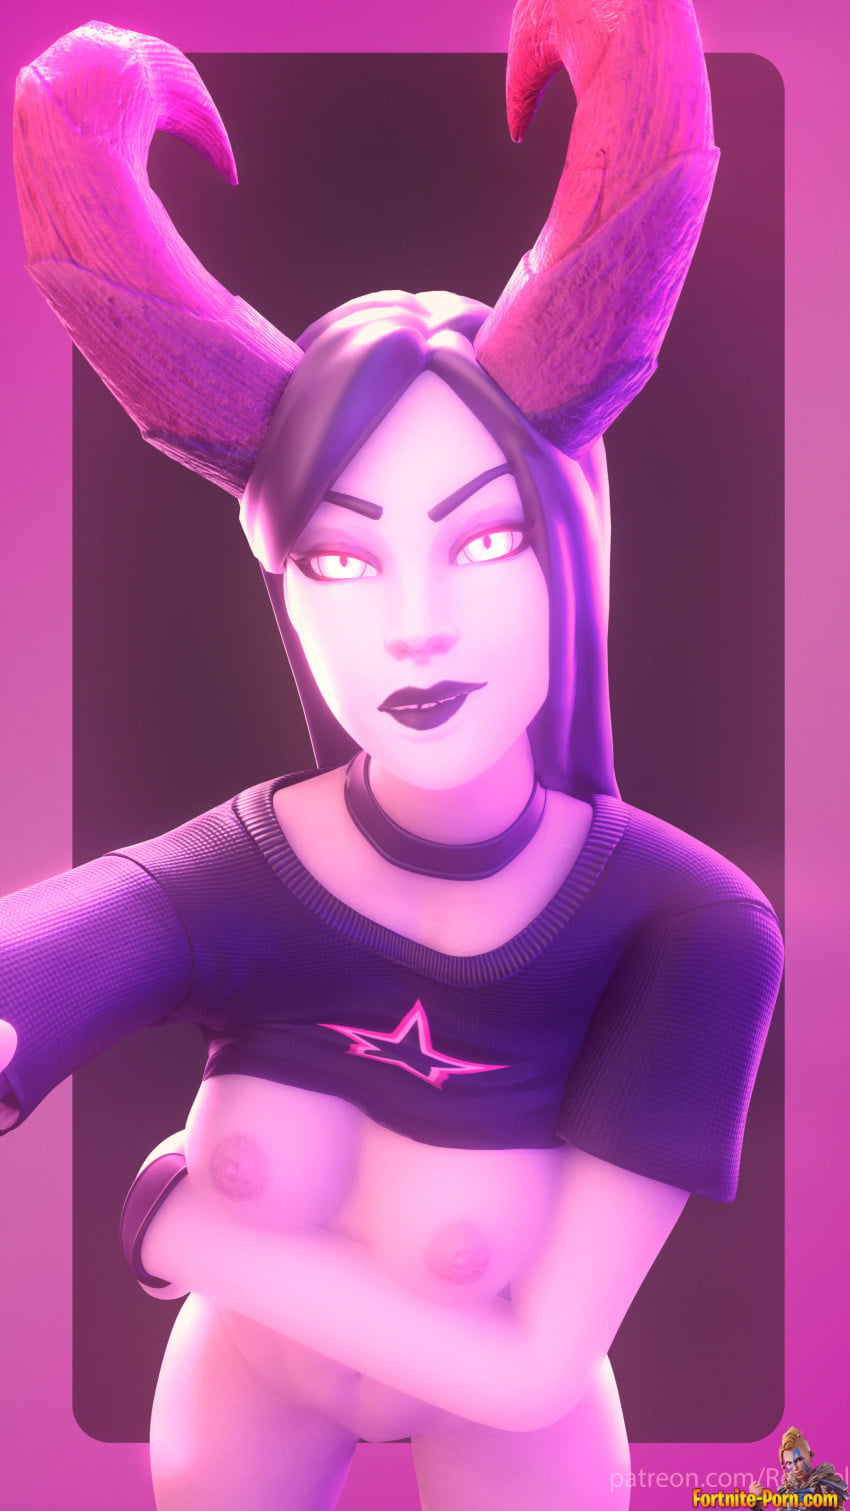 Haze showing boobs😈🔥 with the tag Haze in category Other, Fortnite Porn, Fortnite...